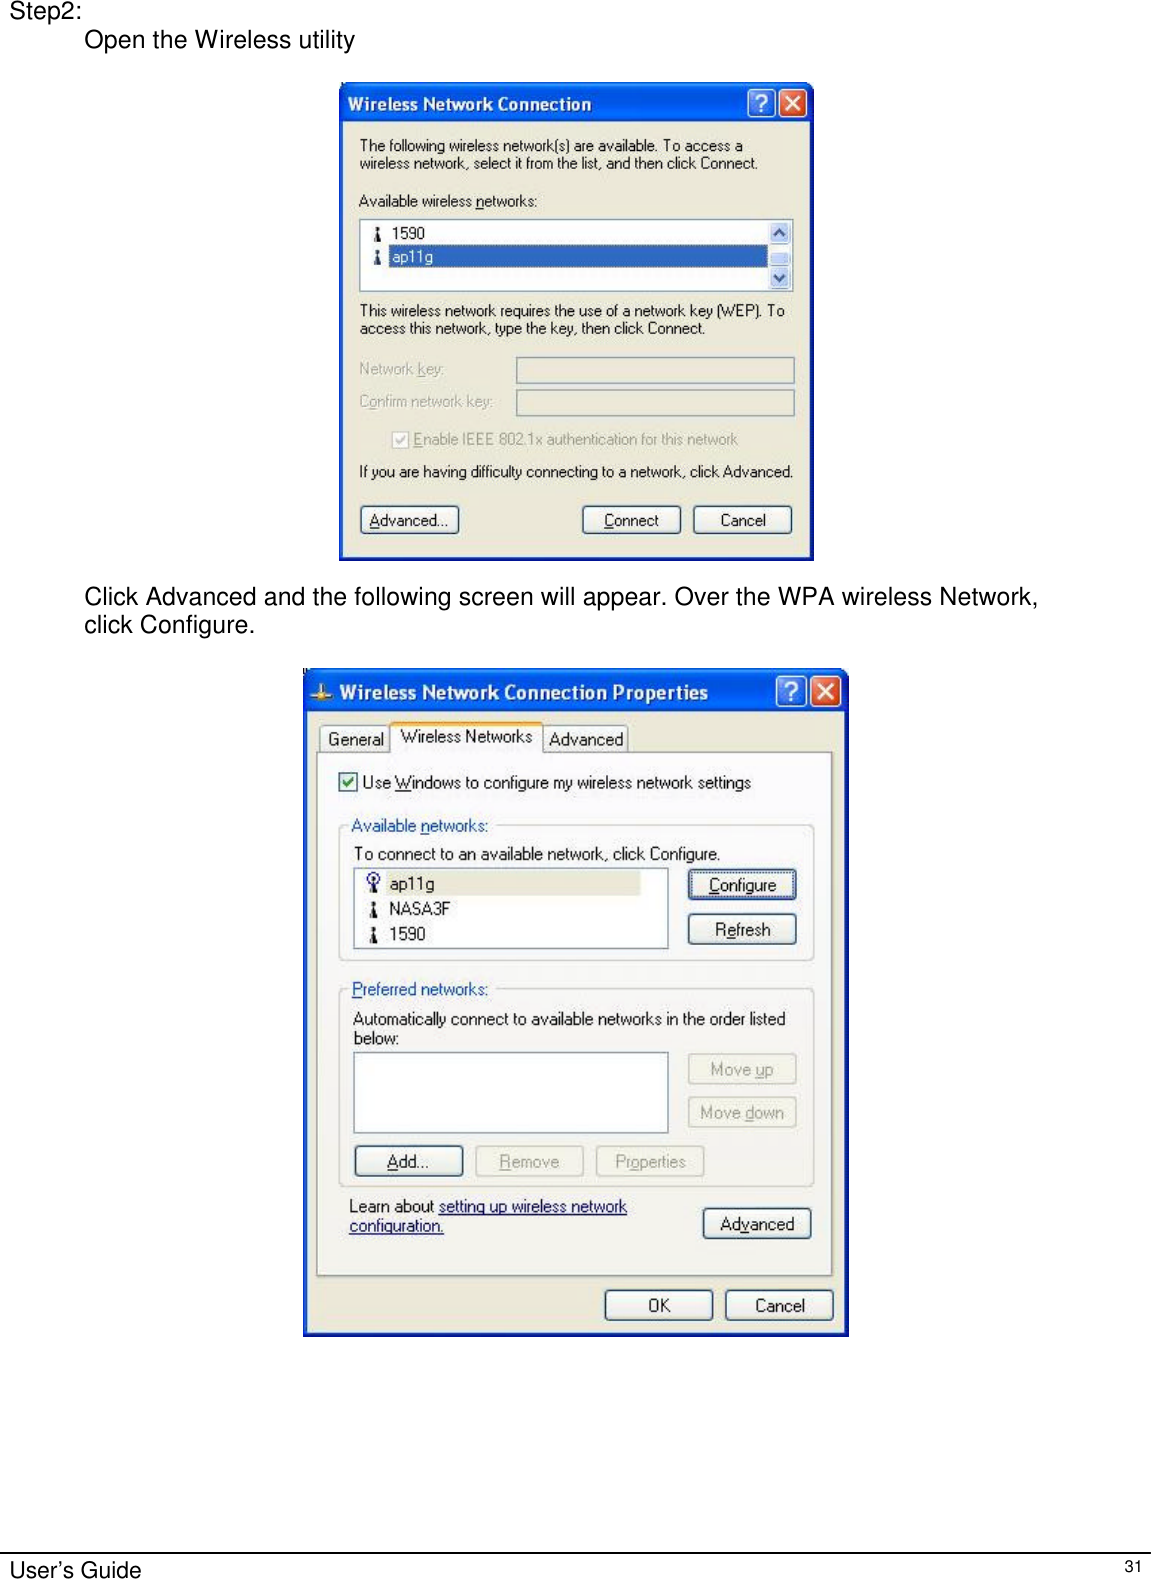                                                                                                                                                                                                                                                                                                                                        User’s Guide   31   Step2: Open the Wireless utility      Click Advanced and the following screen will appear. Over the WPA wireless Network,  click Configure.   